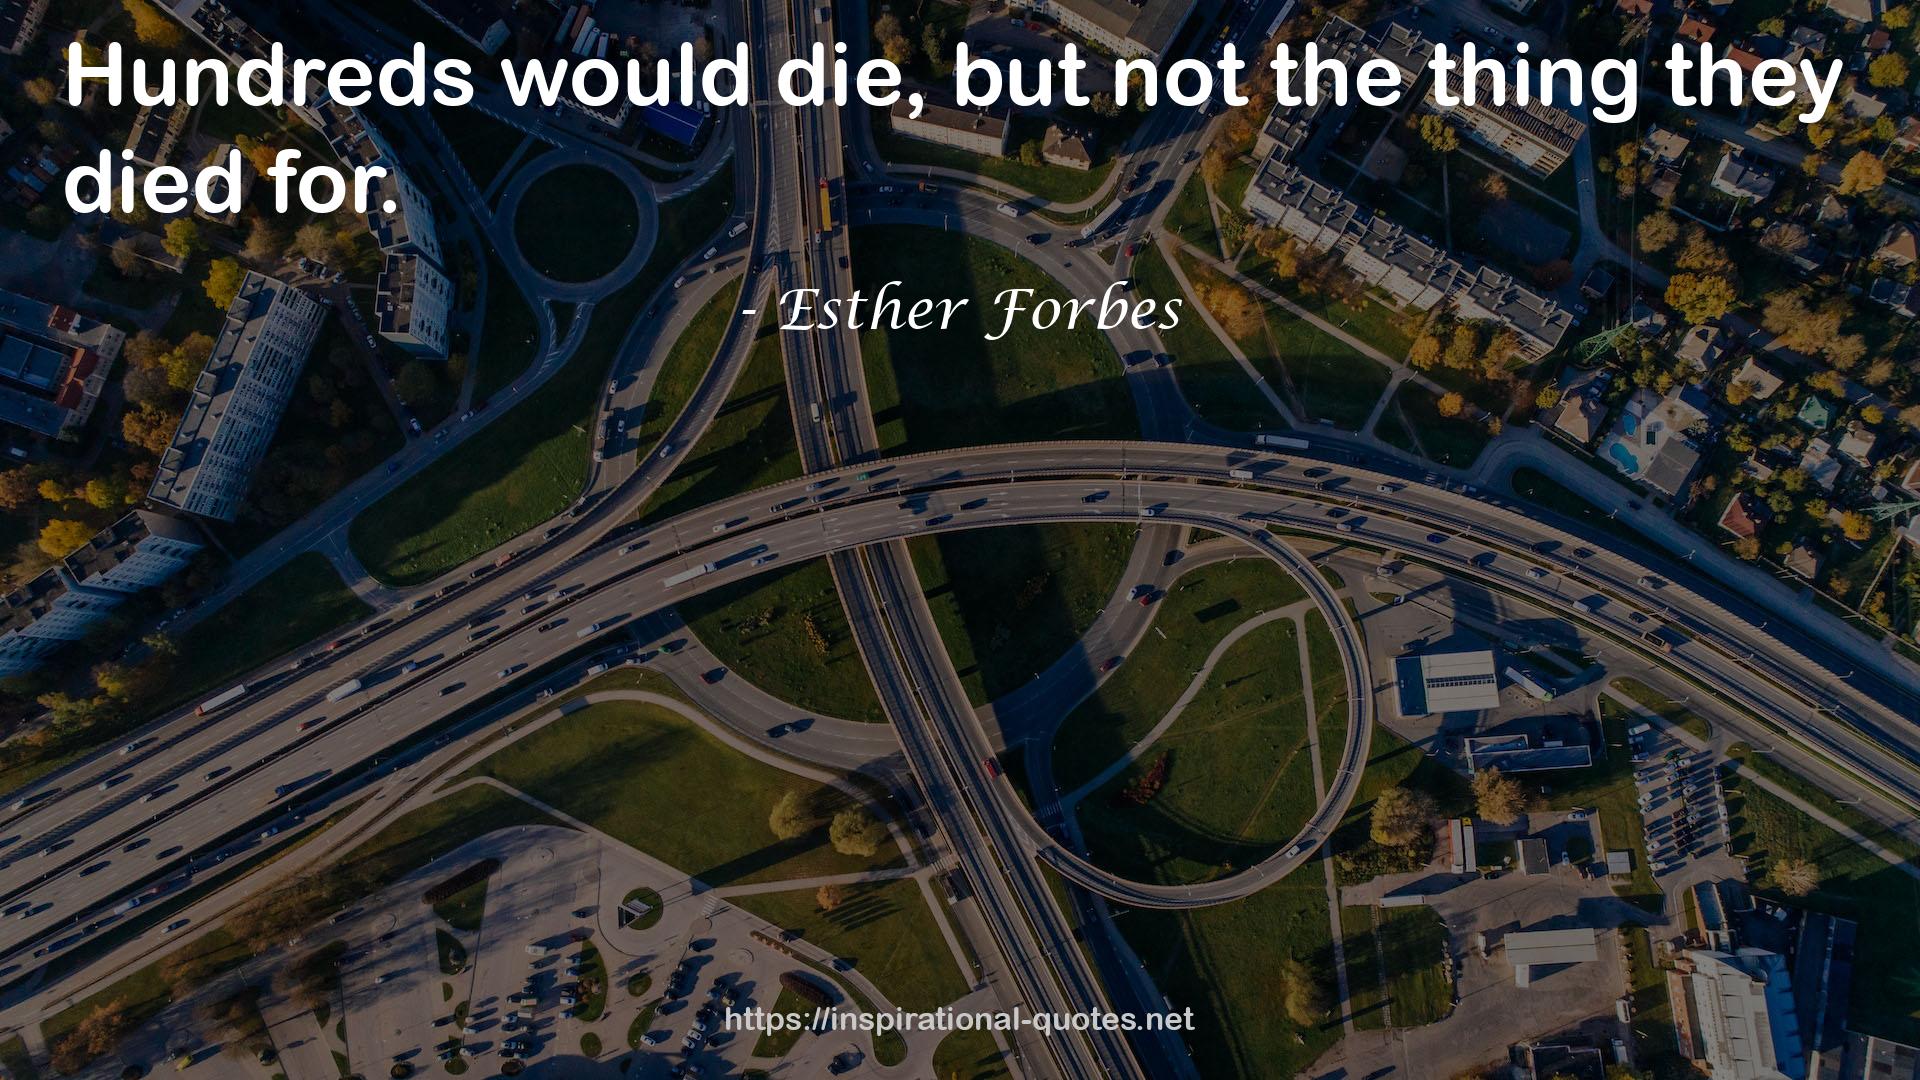 Esther Forbes QUOTES